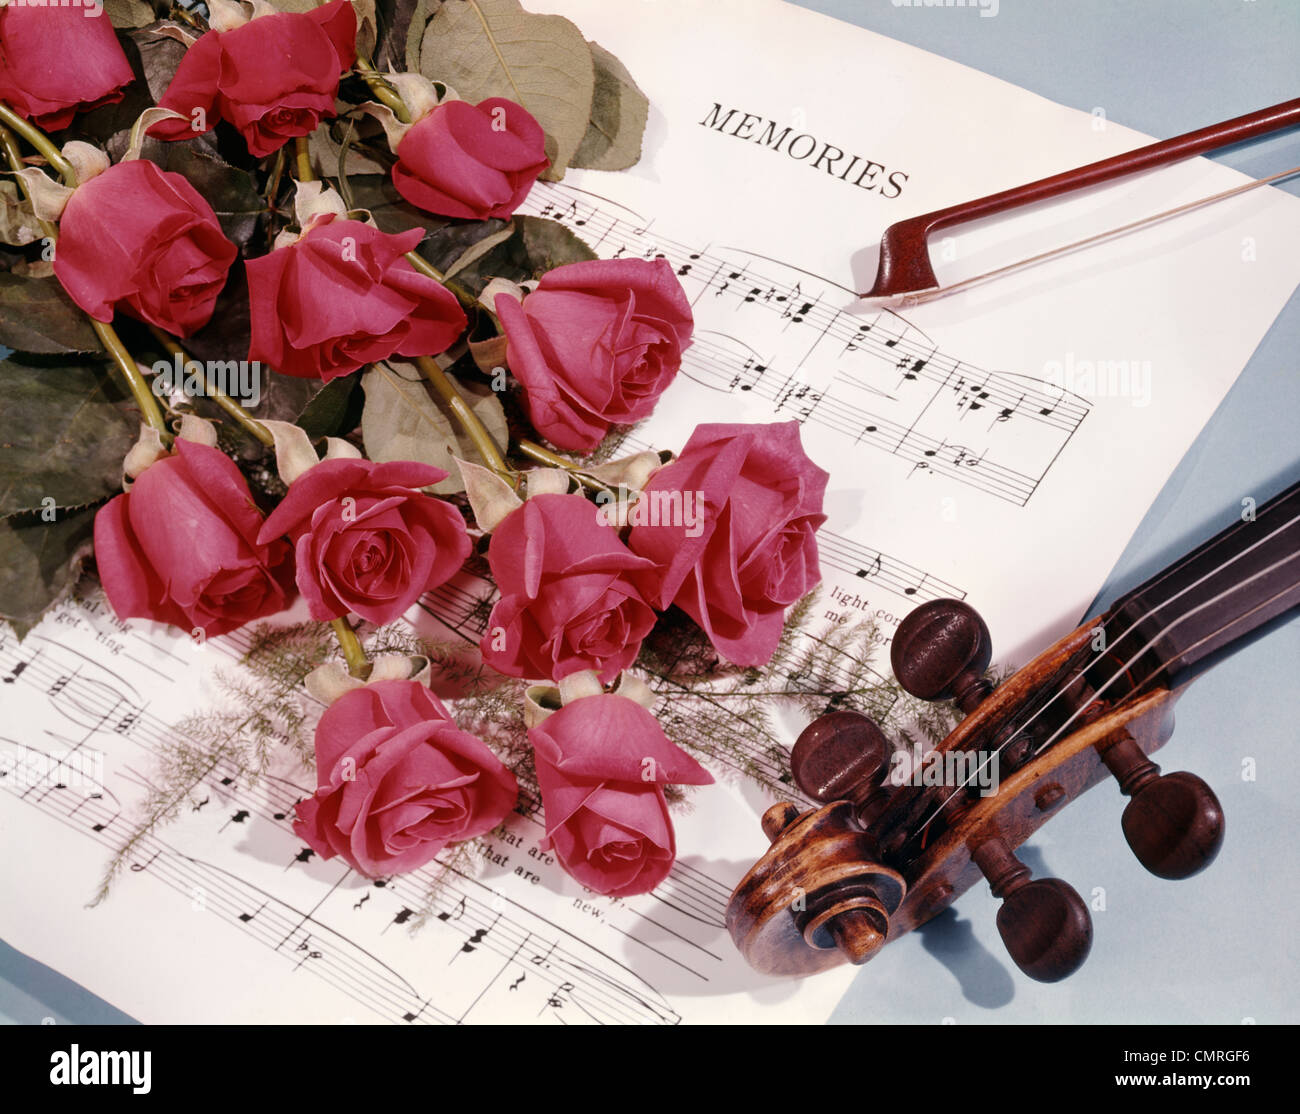 1960s STILL LIFE VIOLIN WITH BOUQUET OF RED ROSES ON TOP OF MEMORIES SHEET MUSIC Stock Photo